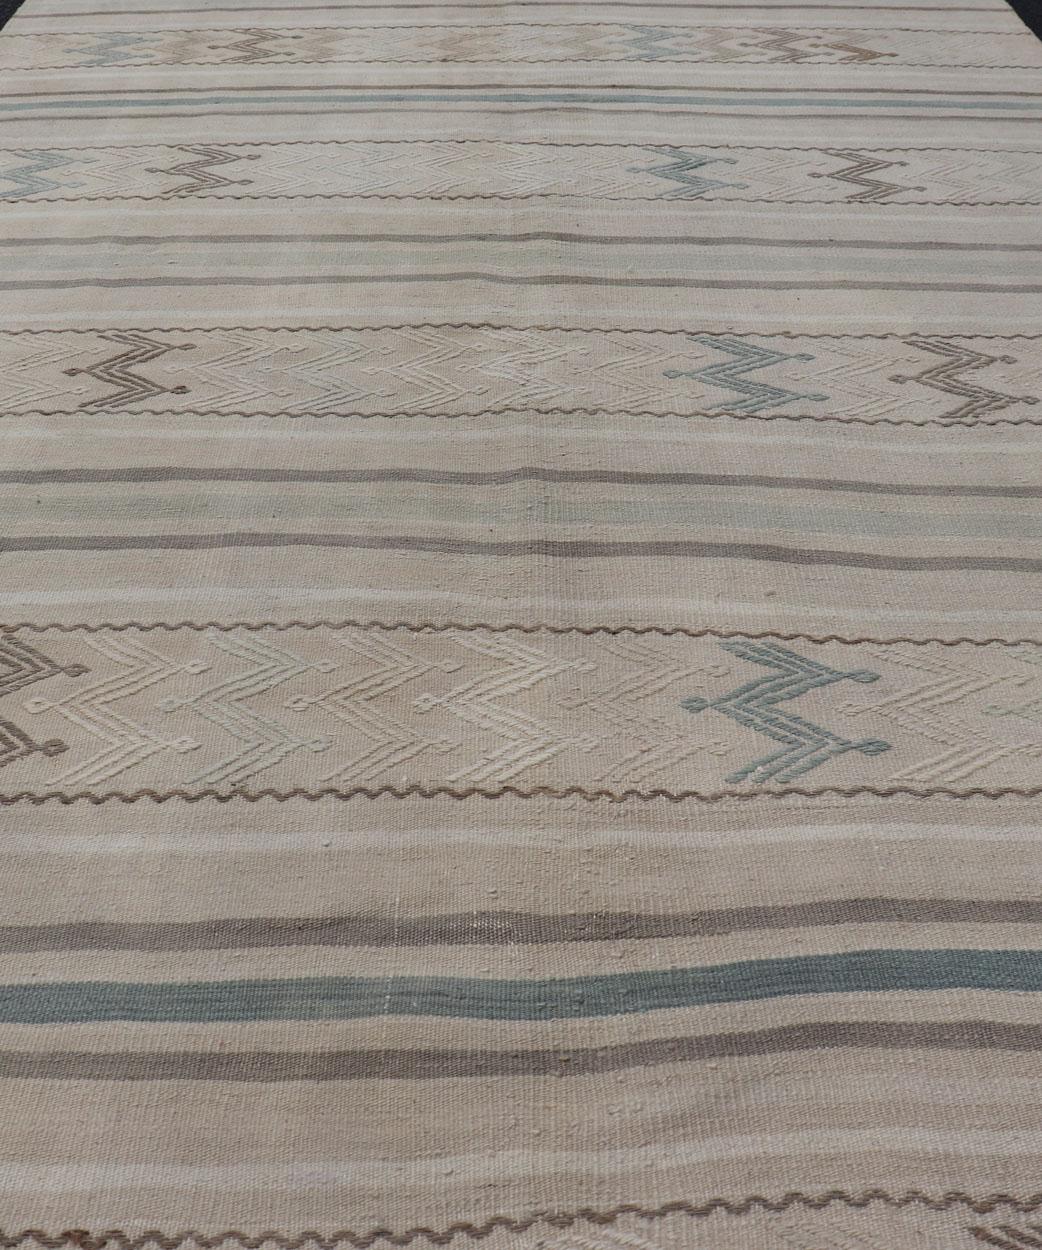 Wool Vintage Turkish Flat-Weave Muted Colored Kilim in Taupe, Brown and Light Blue For Sale